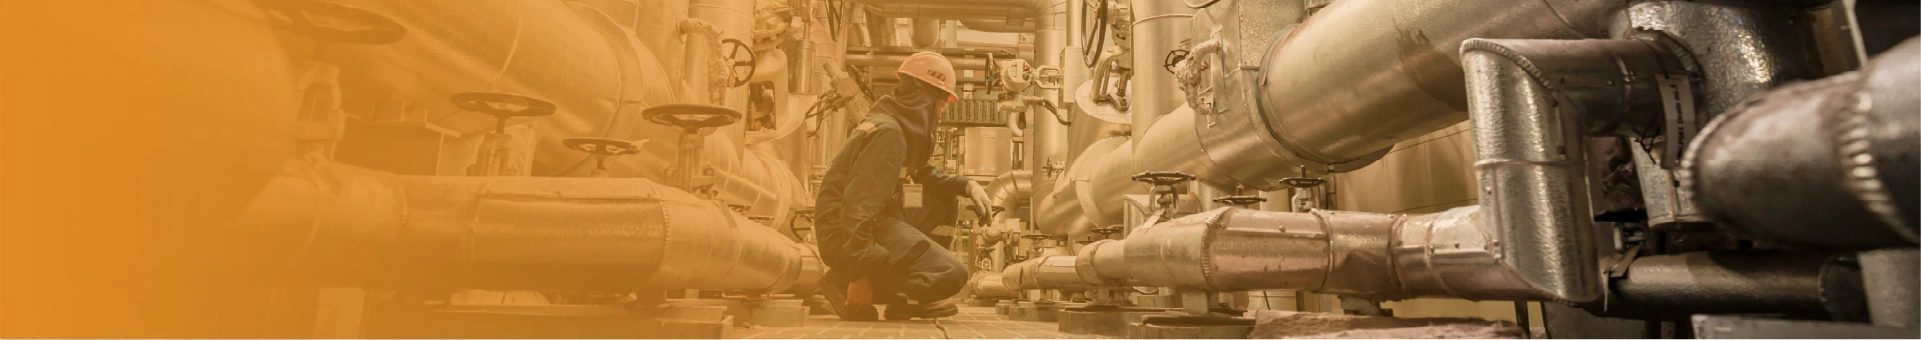 Ensuring safety operations and minimizing downtime